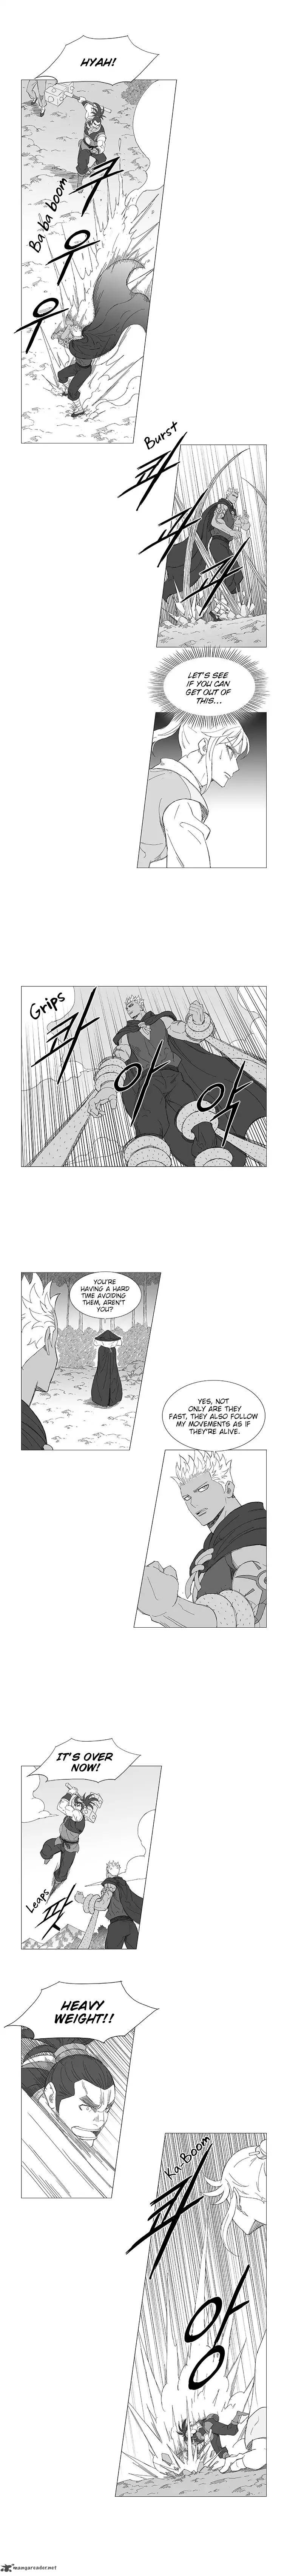 Wind Sword Chapter 5 Page 3